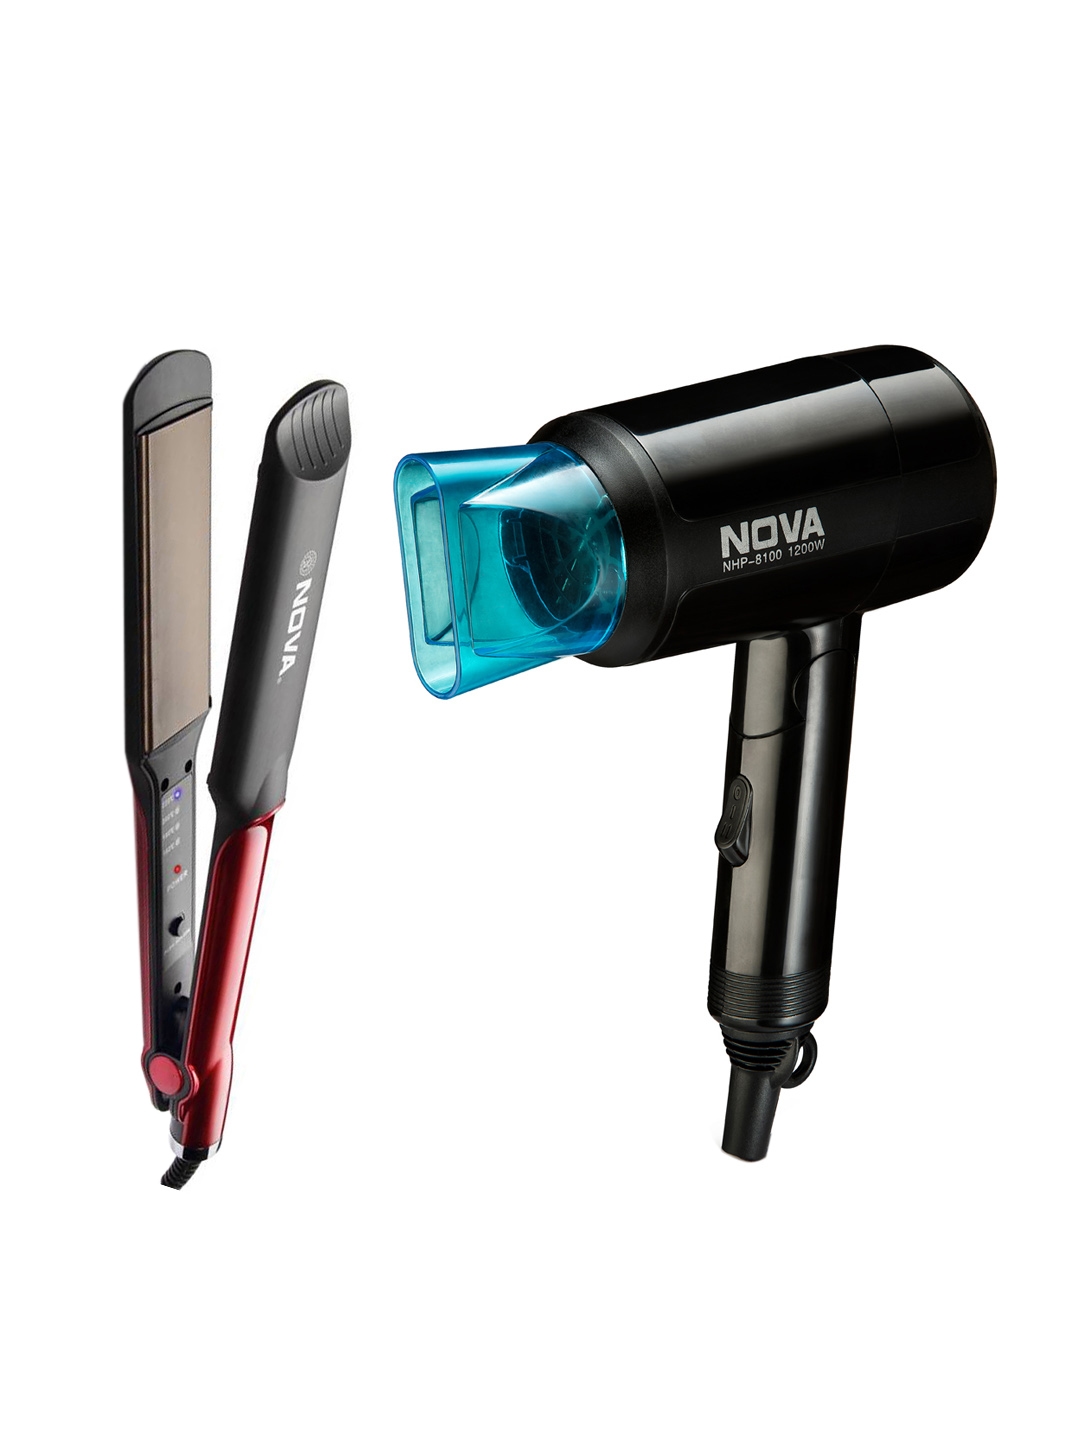 9 Best Blow-Dryers for Straightening Hair Without Damage